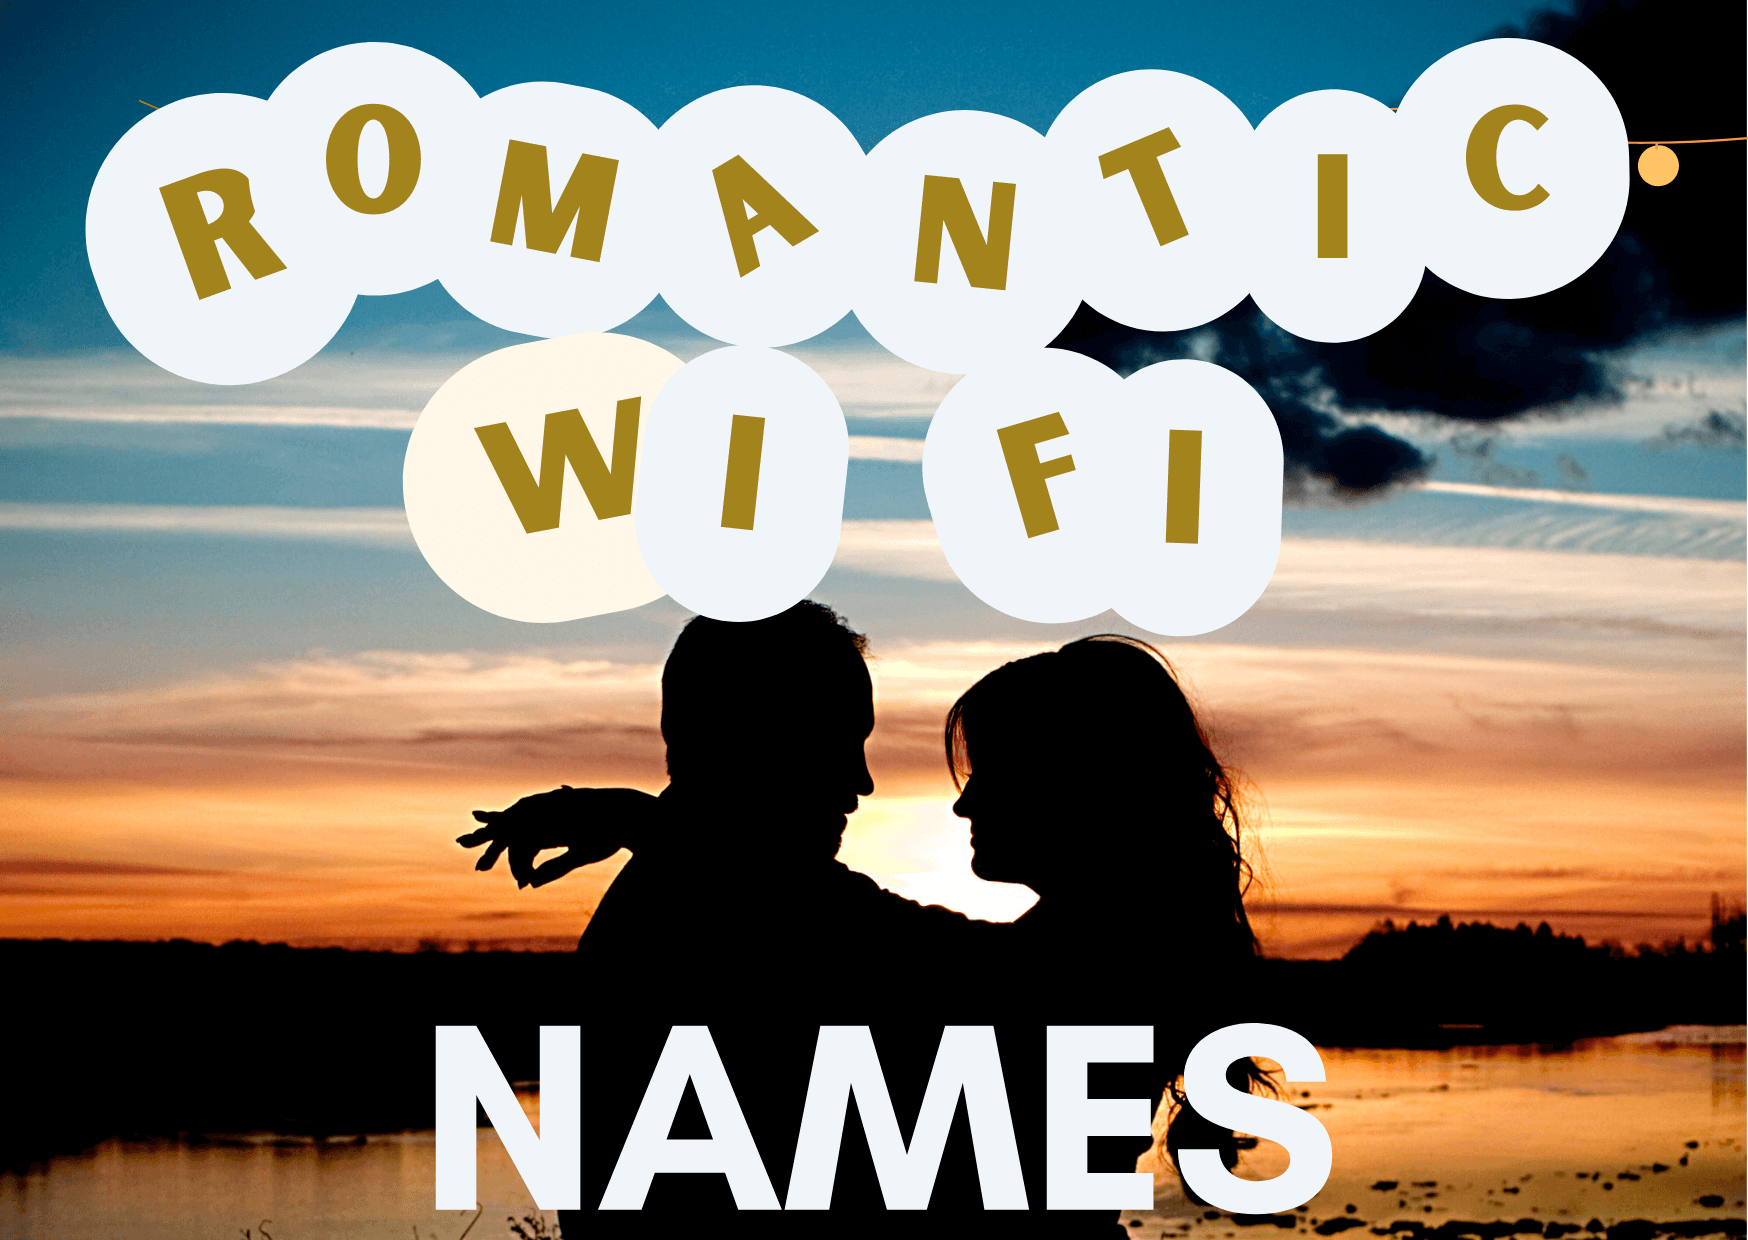 Romantic WiFi Names for Couples